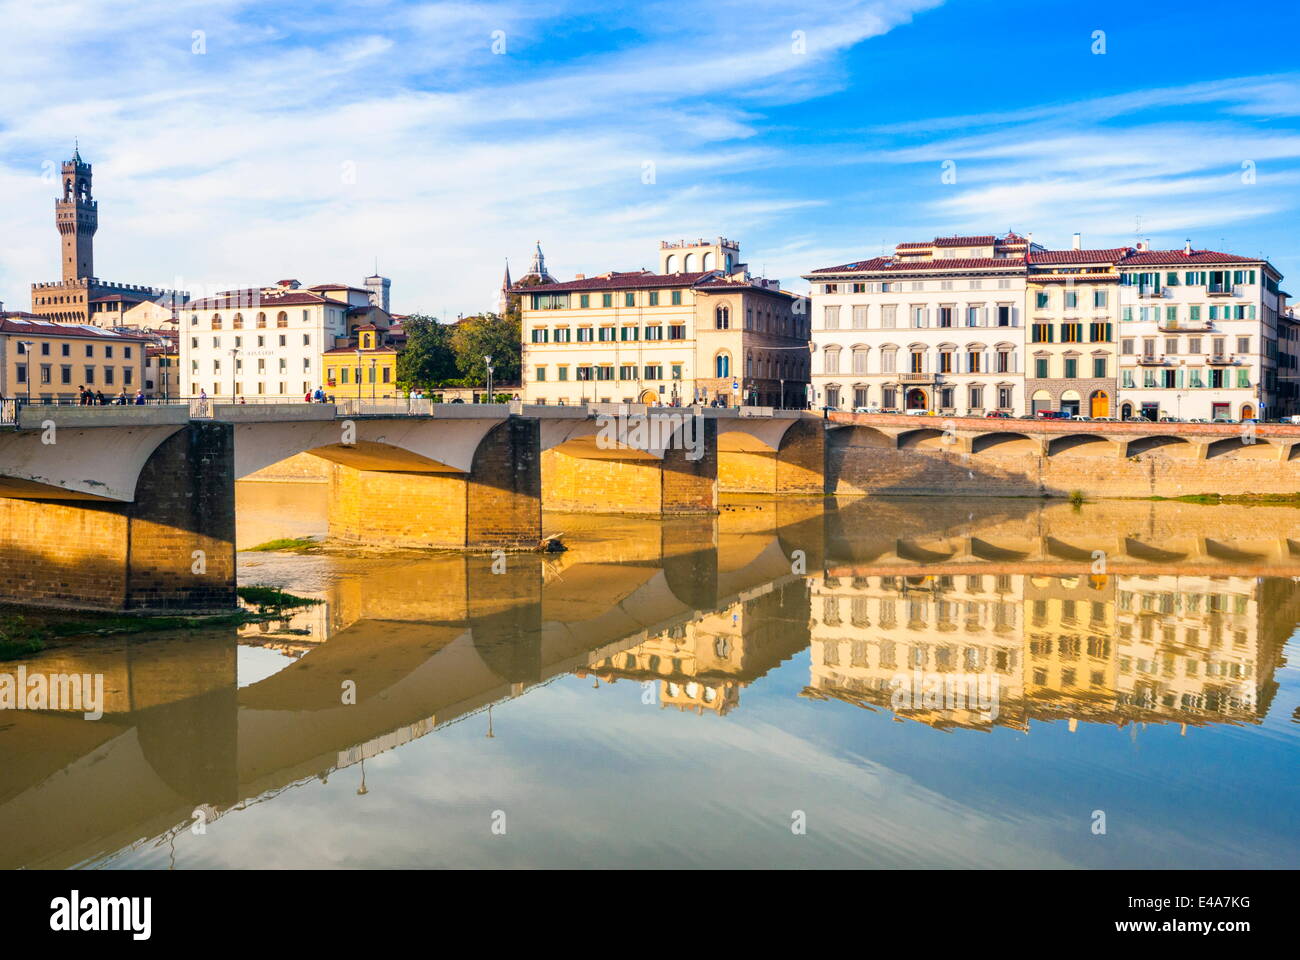 Ponte alle Grazie over the River Arno, Florence (Firenze), UNESCO World Heritage Site, Tuscany, Italy, Europe Stock Photo